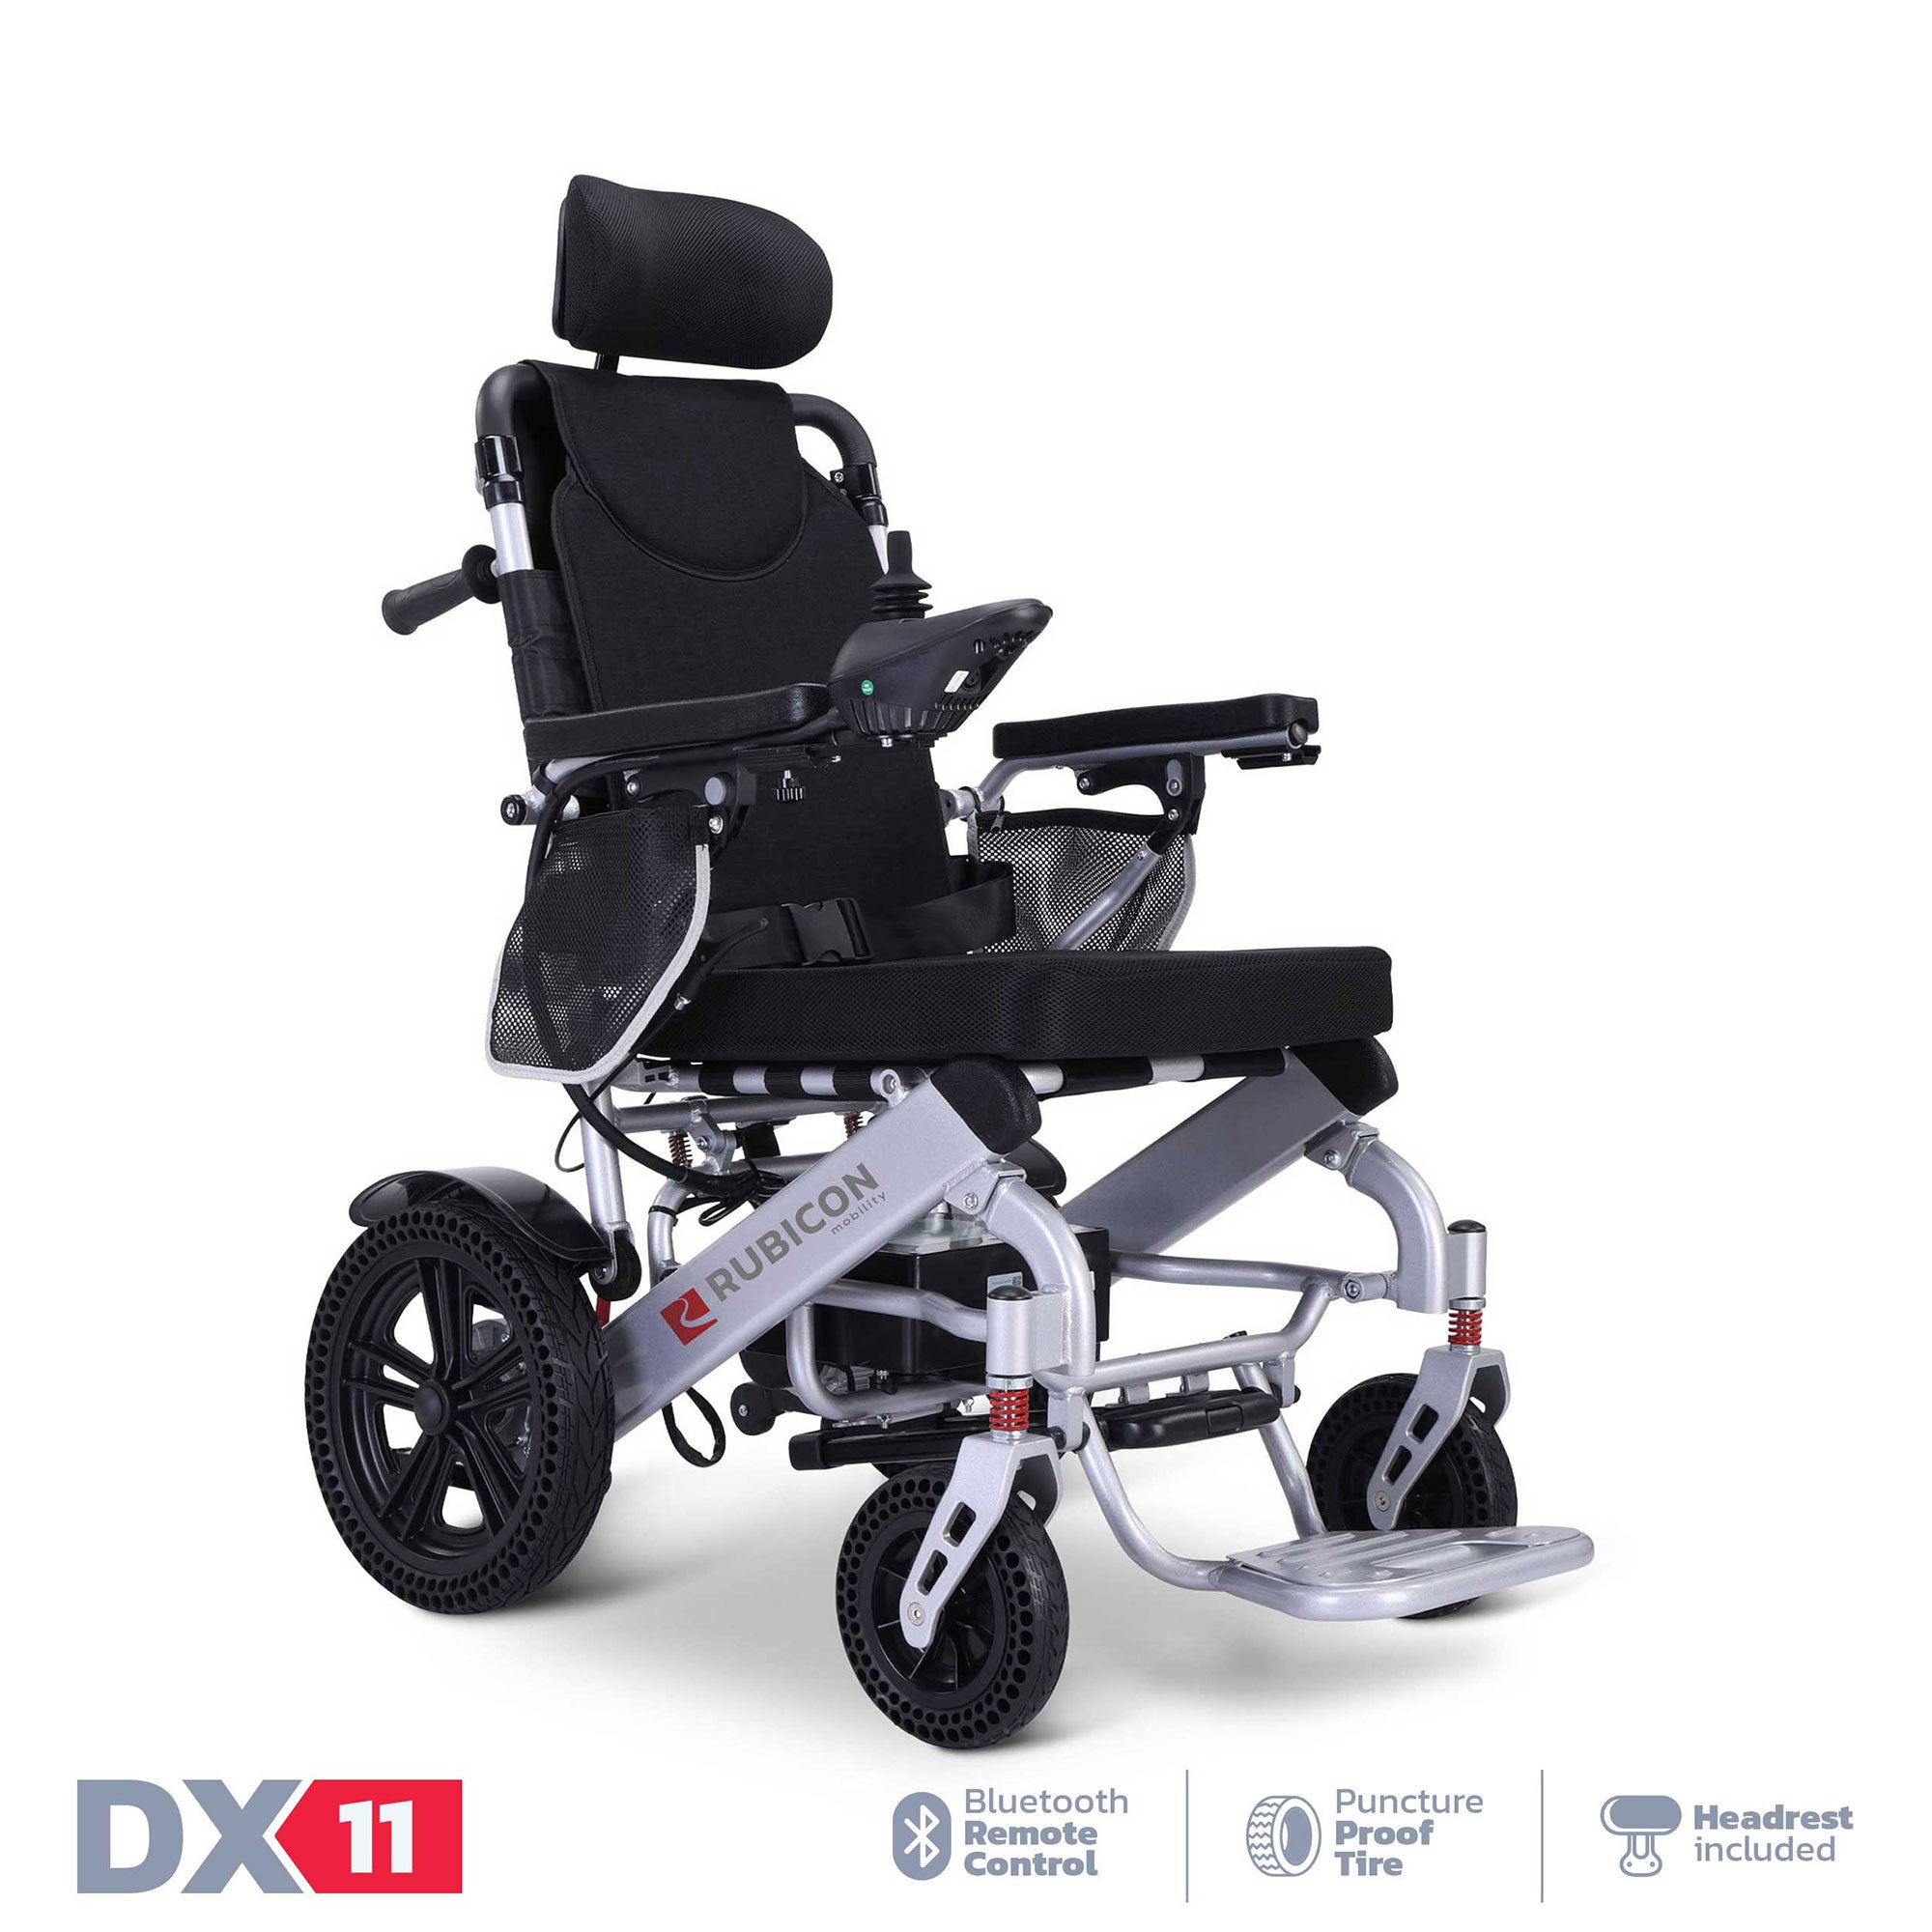 Rubicon DX11 - Reclining Electric Wheelchair - Electricwheelchair.Store